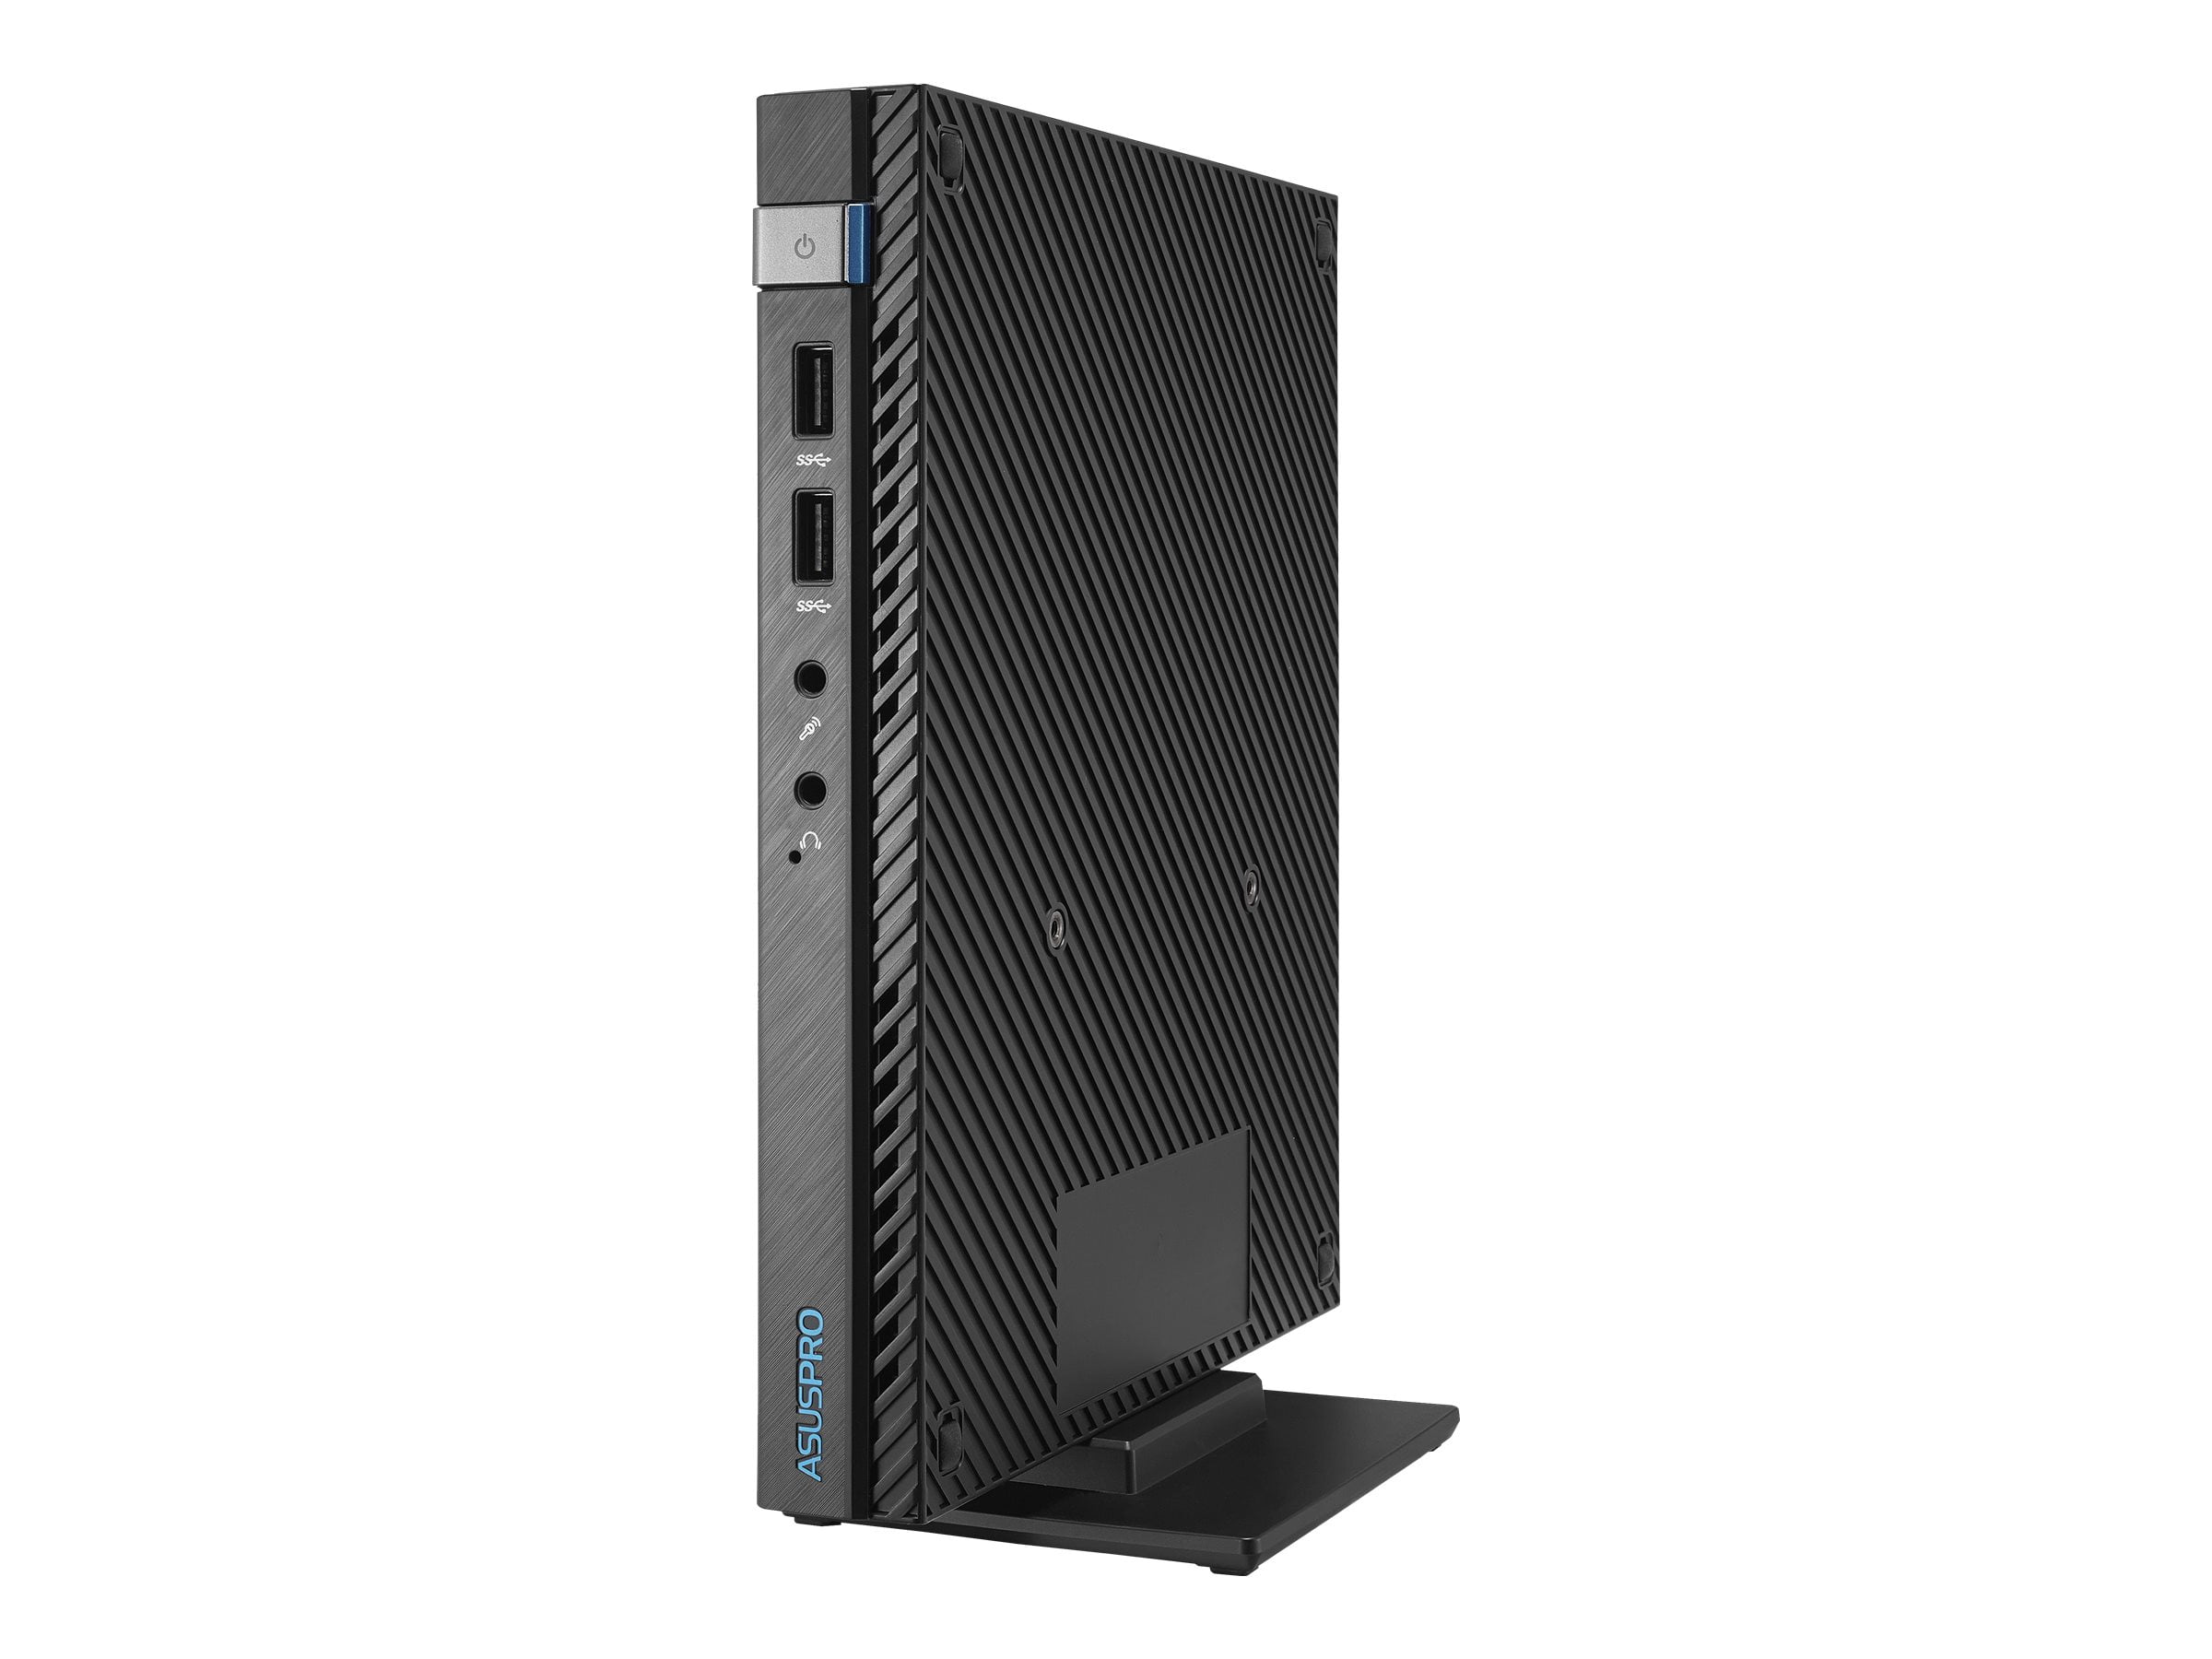 eigendom Hoelahoep Appartement ASUS E810-B0274 - Mini PC - Core i3 4150T / 3 GHz - RAM 4 GB - HDD 500 GB -  HD Graphics 4400 - GigE - WLAN: 802.11b/g/n - Win 8.1 Pro 64-bit - monitor:  none - black - with 100 GB ASUS WebStorage (1 year) - Walmart.